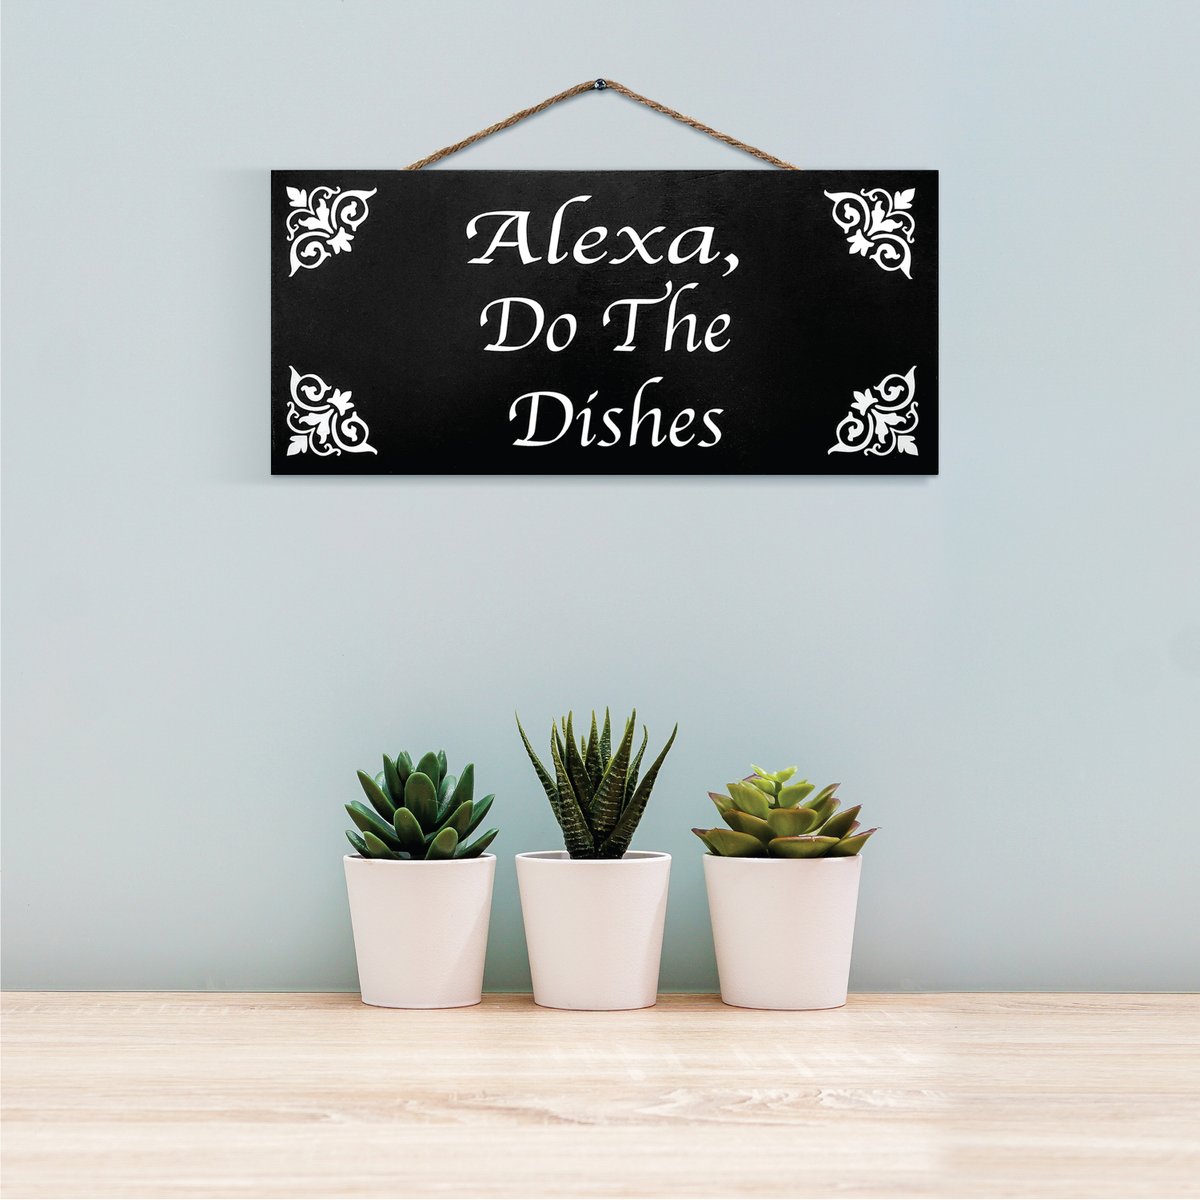 Who else wishes Alexa could do the dishes? Grab it here ▶️ amzn.to/3jTnghK #alexa #kitchen #kitchendecor #funnykitchen #funnygifts #homeaccent #instahome #homedecor #decor #homedecoration #walldecor #kitchendesign #interiordecor #lifestyle